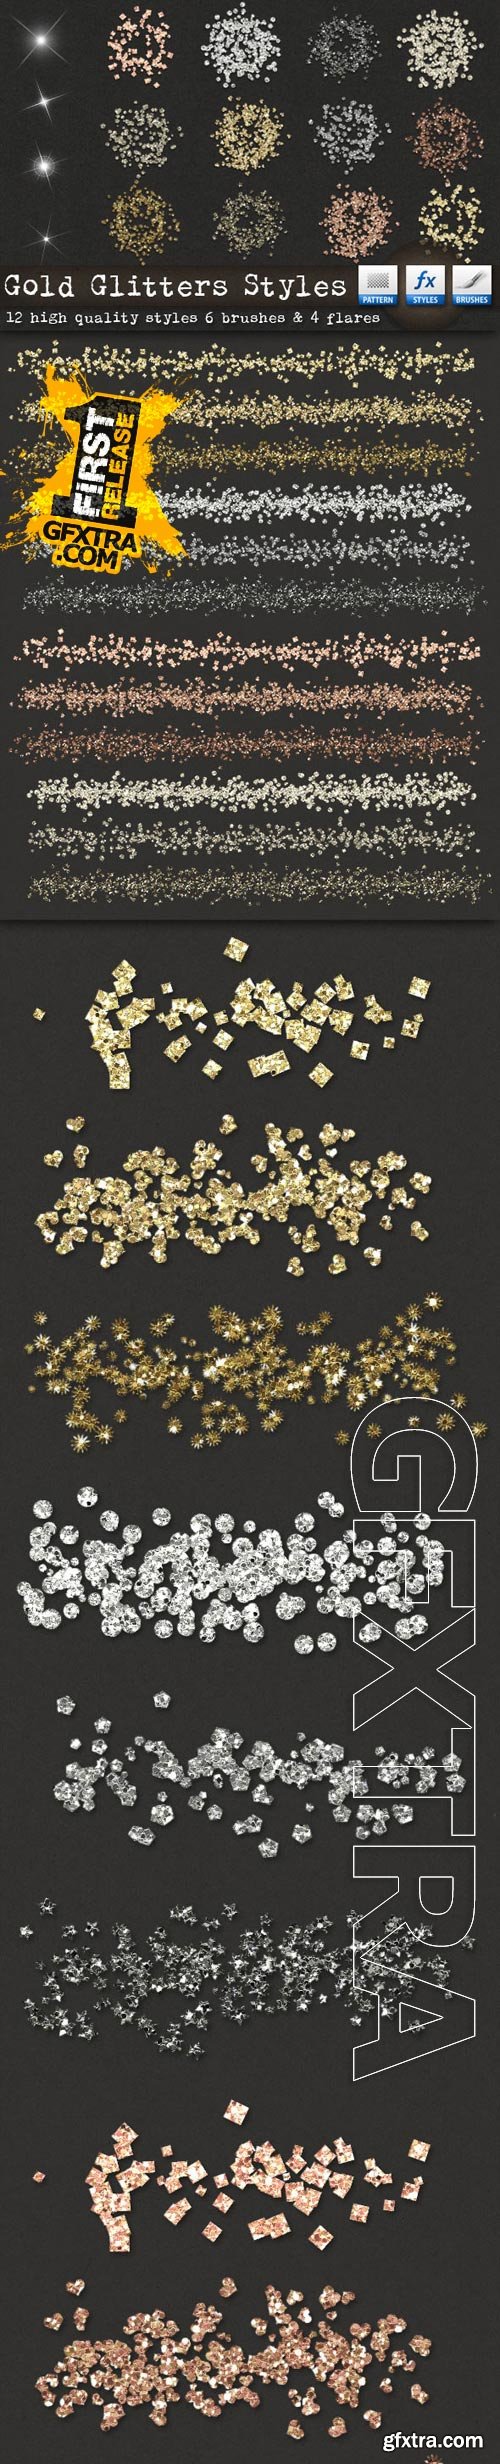 Graphicriver - Gold Glitters Styles